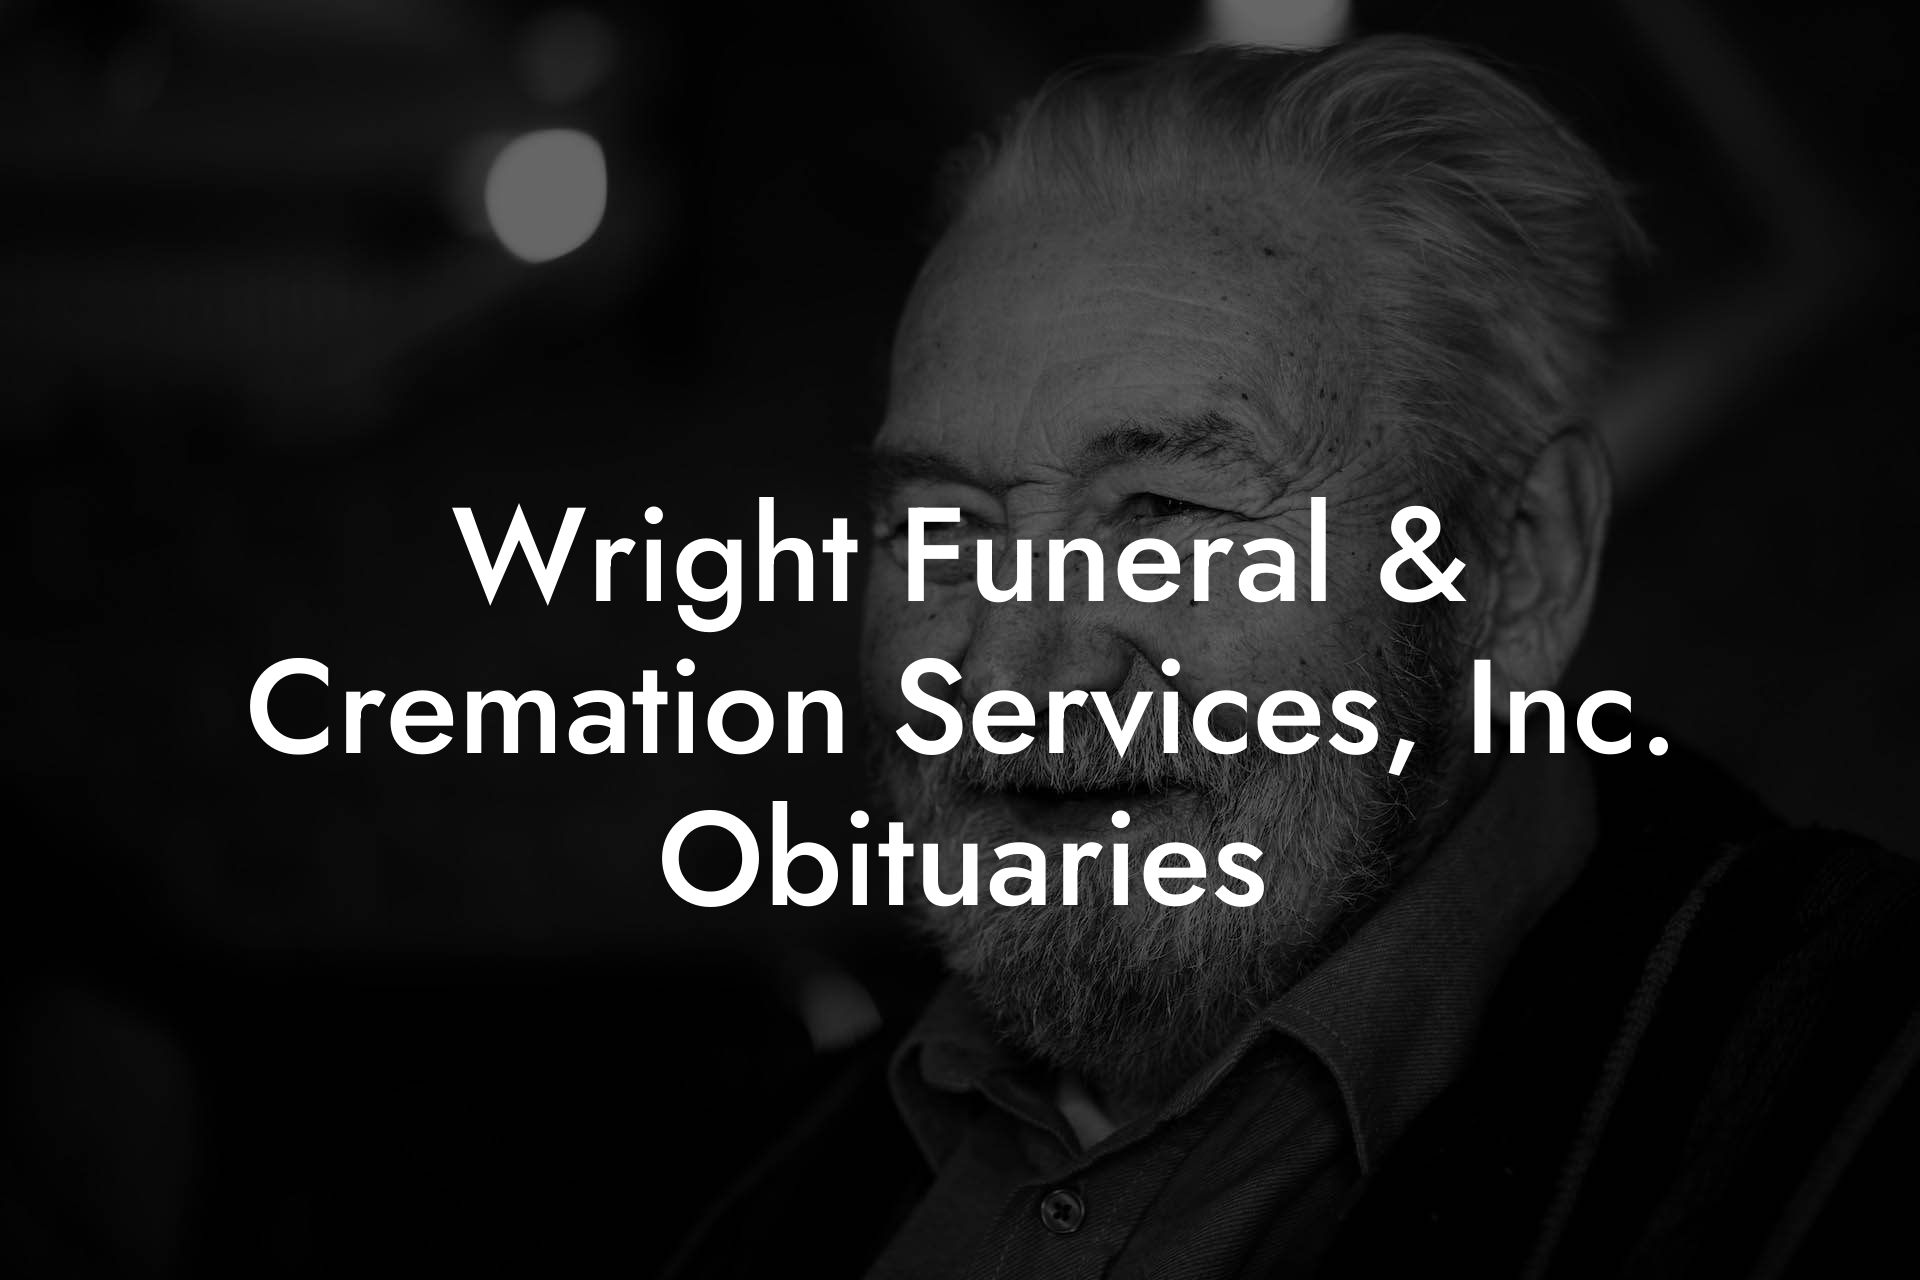 Wright Funeral & Cremation Services, Inc. Obituaries